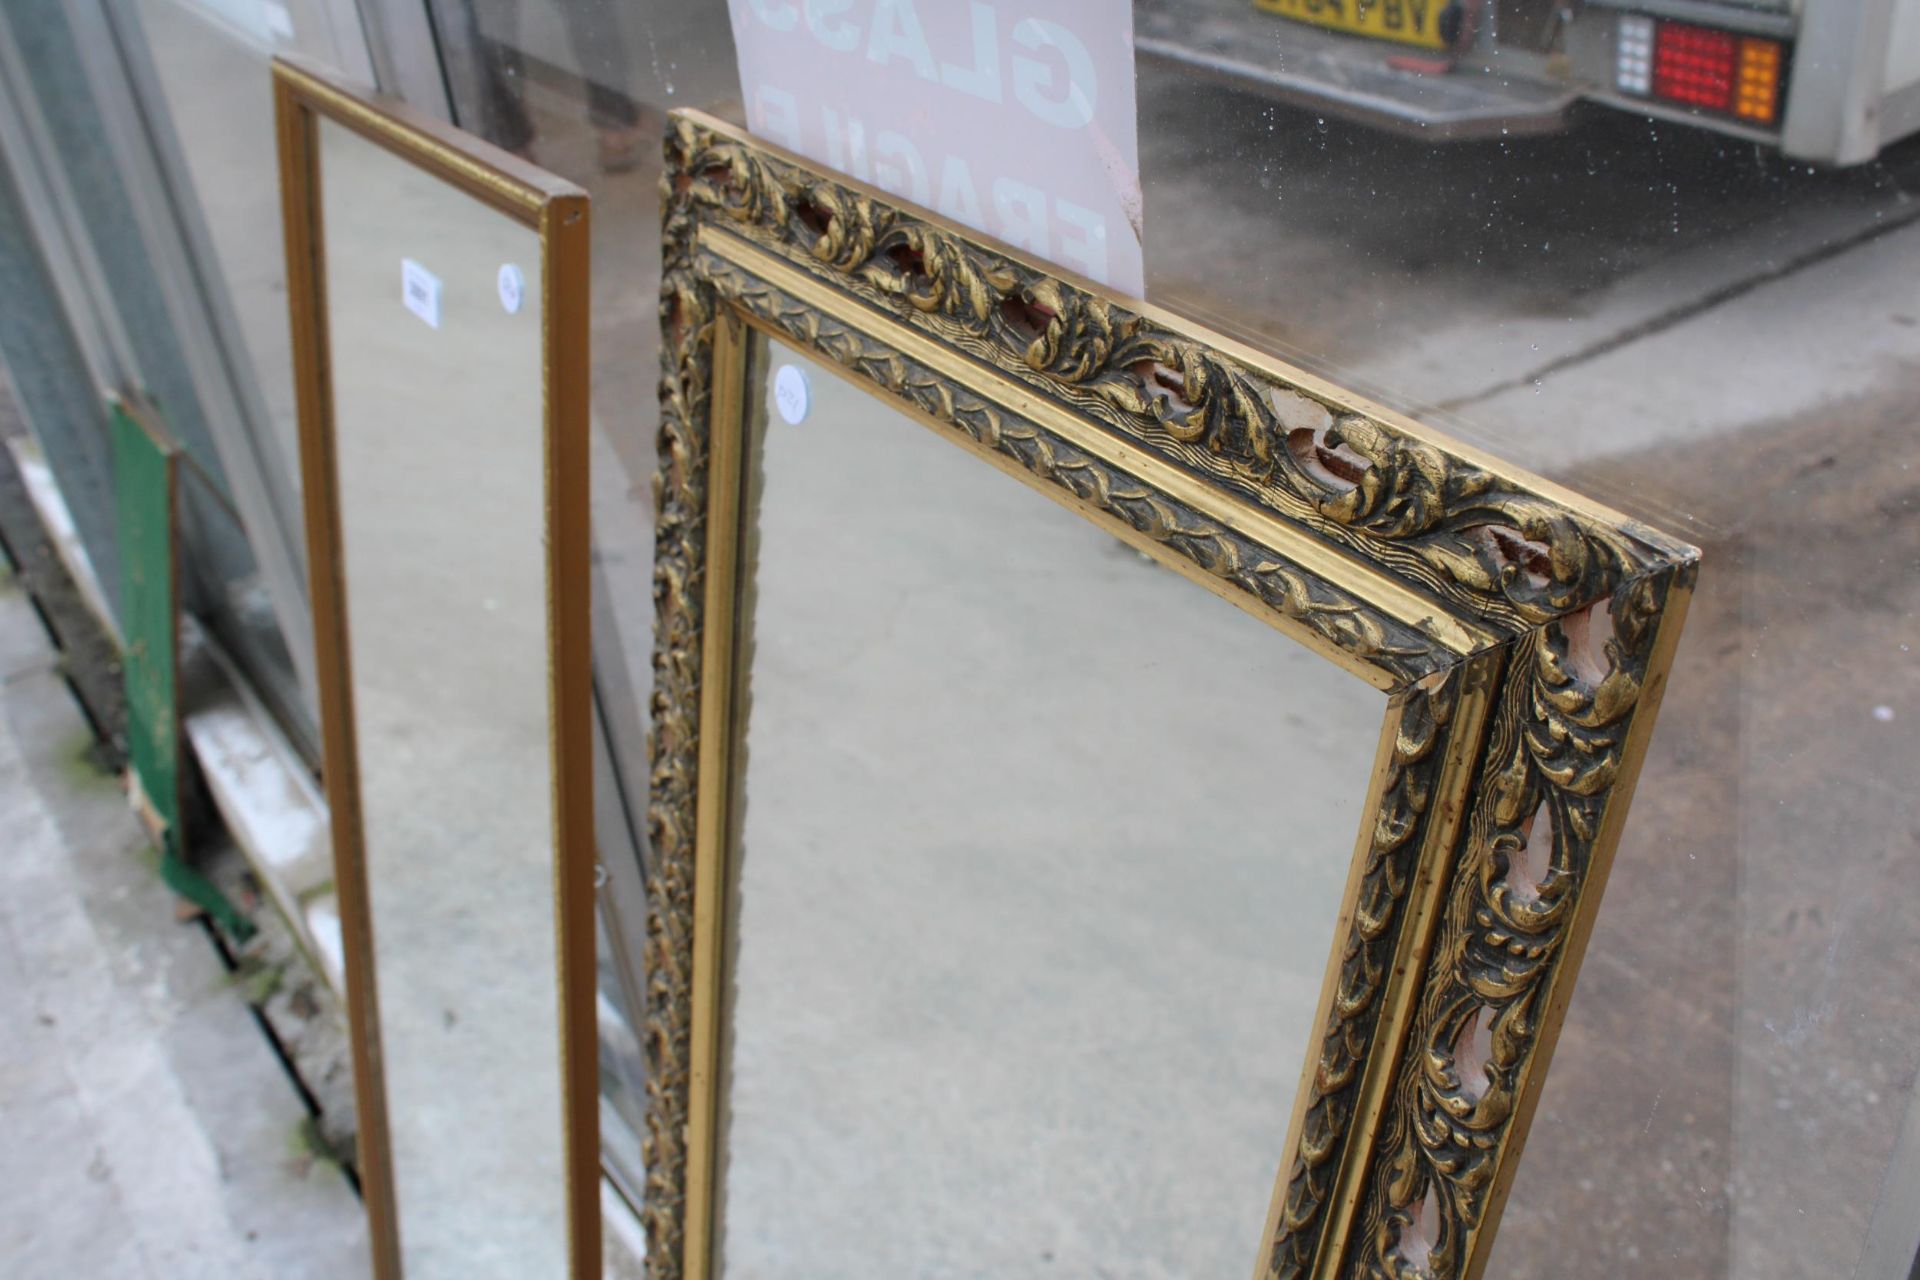 A GILT FRAMED WALL MIRROR 50" X 16" AND A SMALLER MIRROR - Image 2 of 2